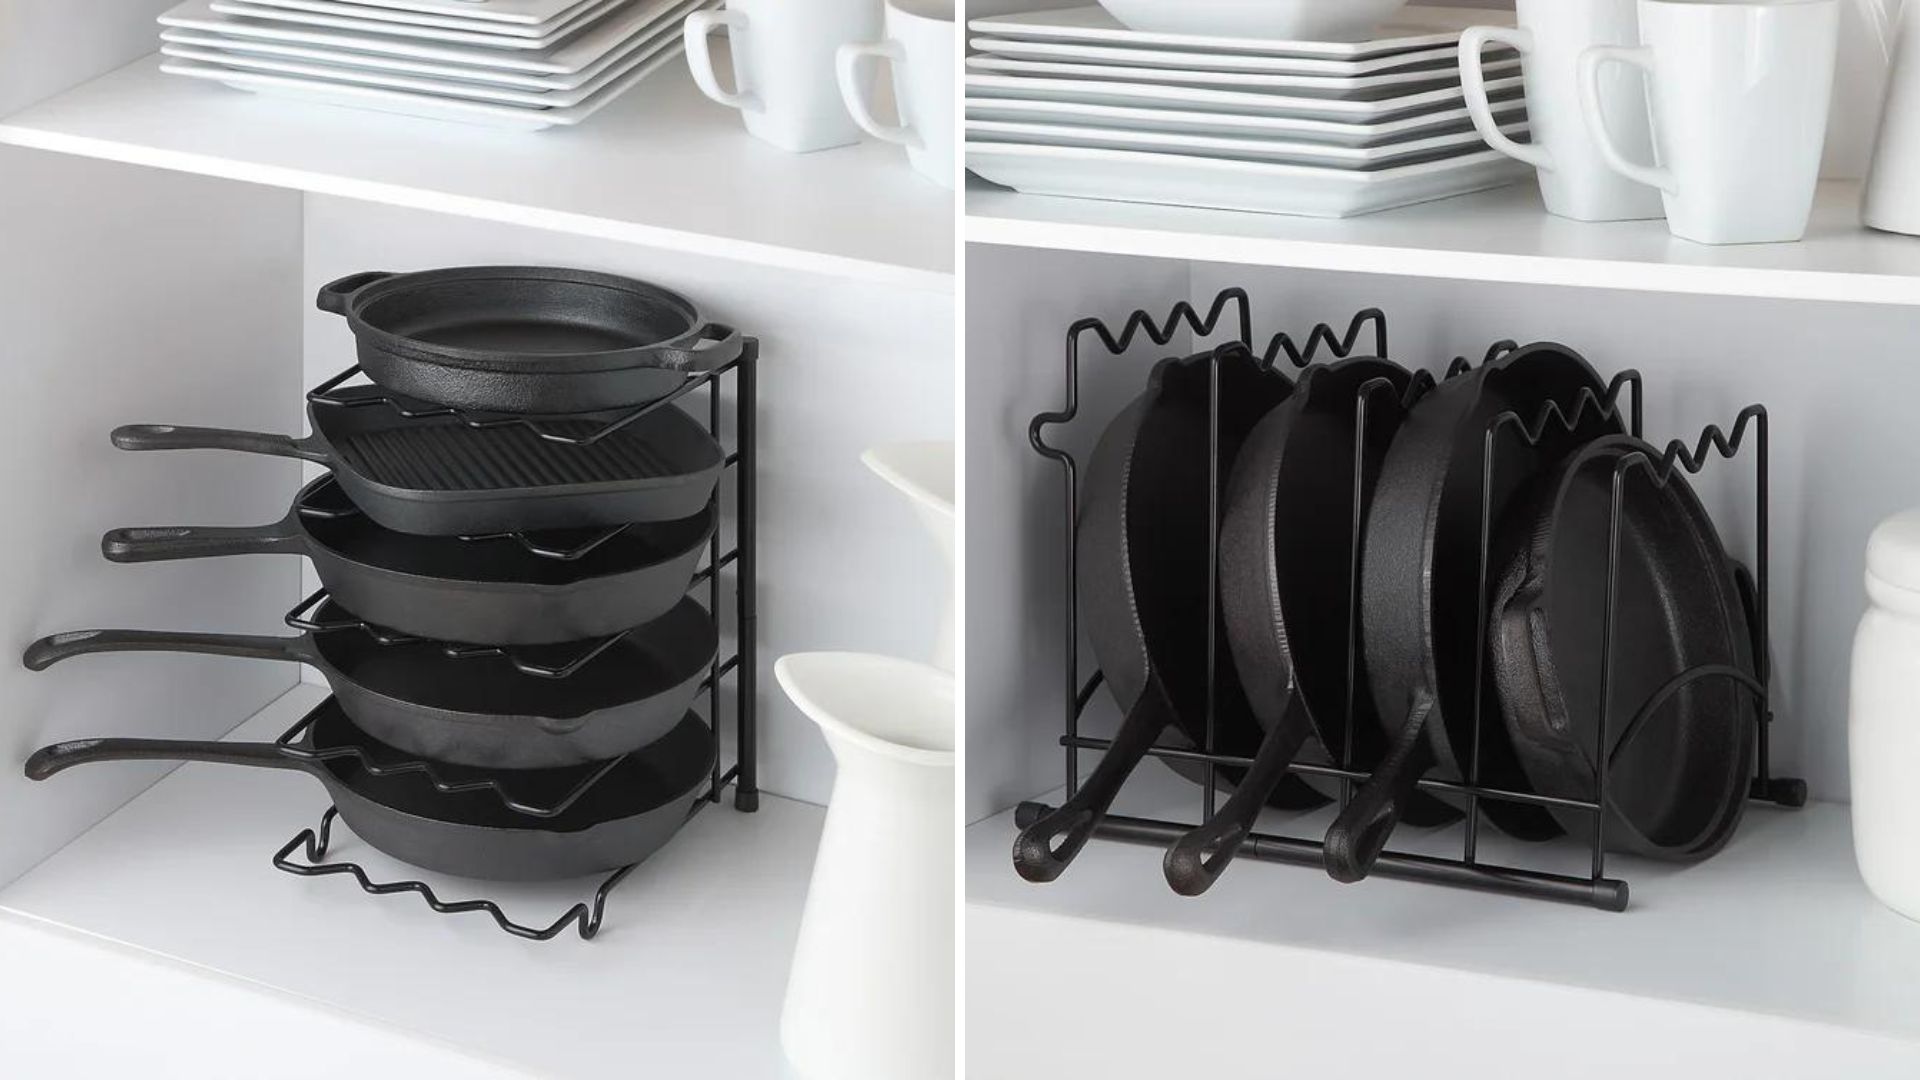 robust wire stacked pan storage show inside kitchen cupboards both vertically and horizontally